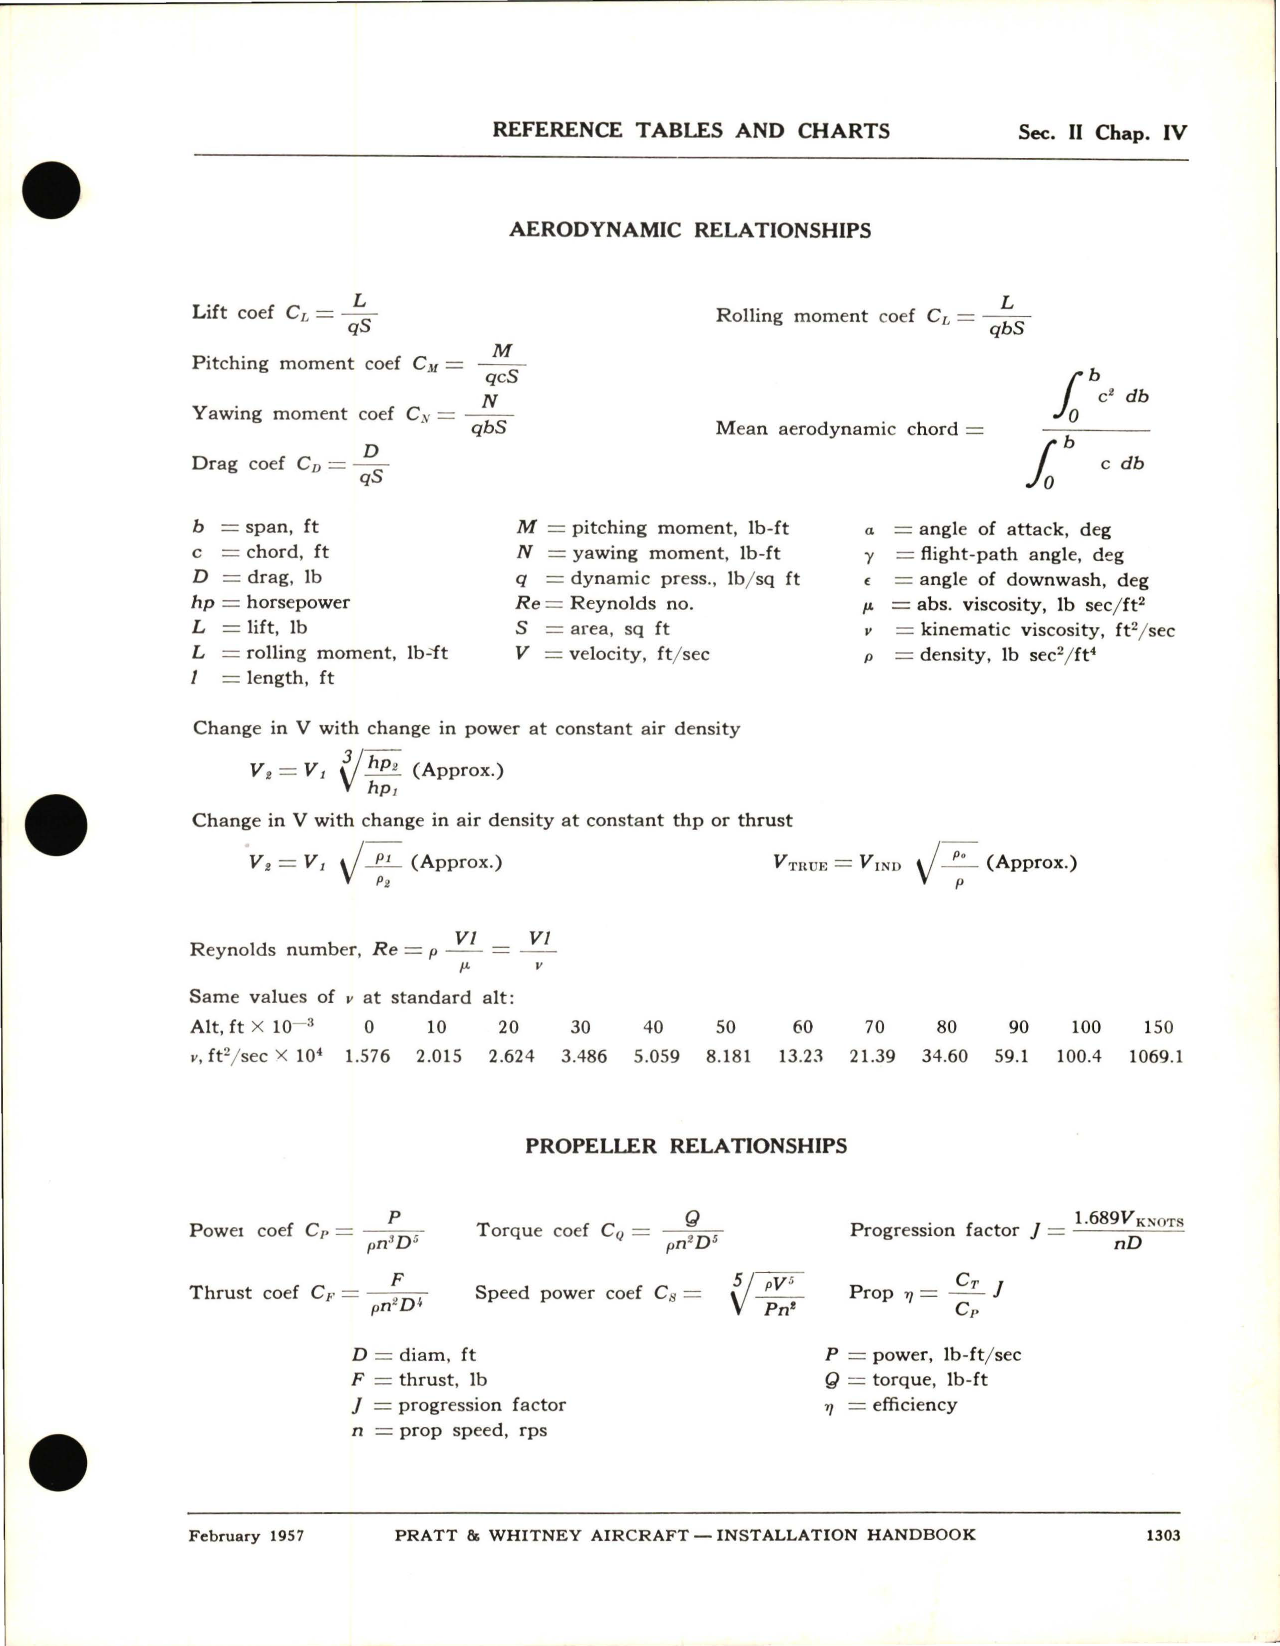 Sample page 1 from AirCorps Library document: Installation Handbook for Reference Tables and Charts 